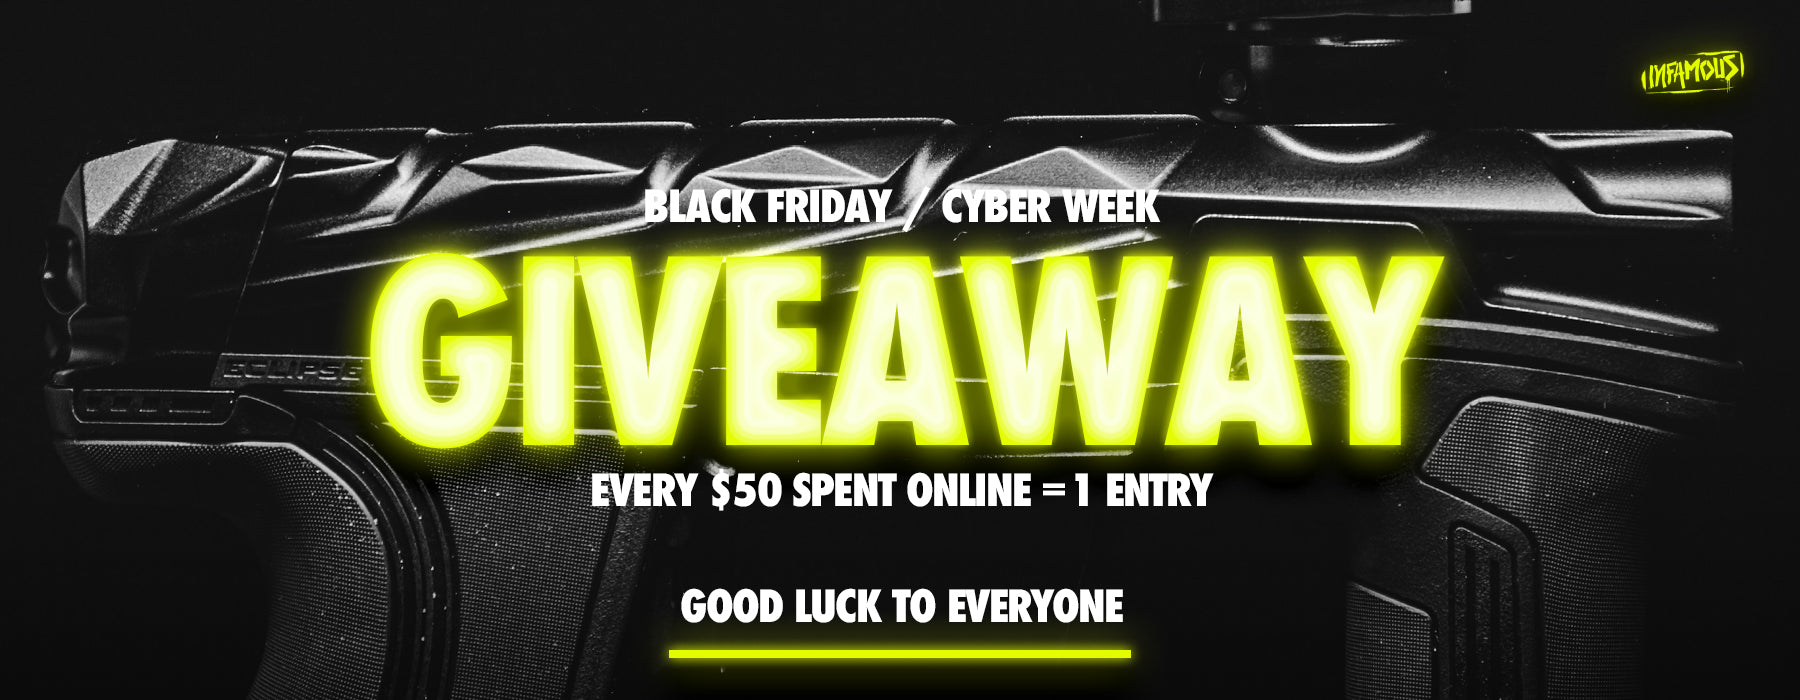 INFAMOUS BLACK FRIDAY CYBER WEEK GIVEAWAY